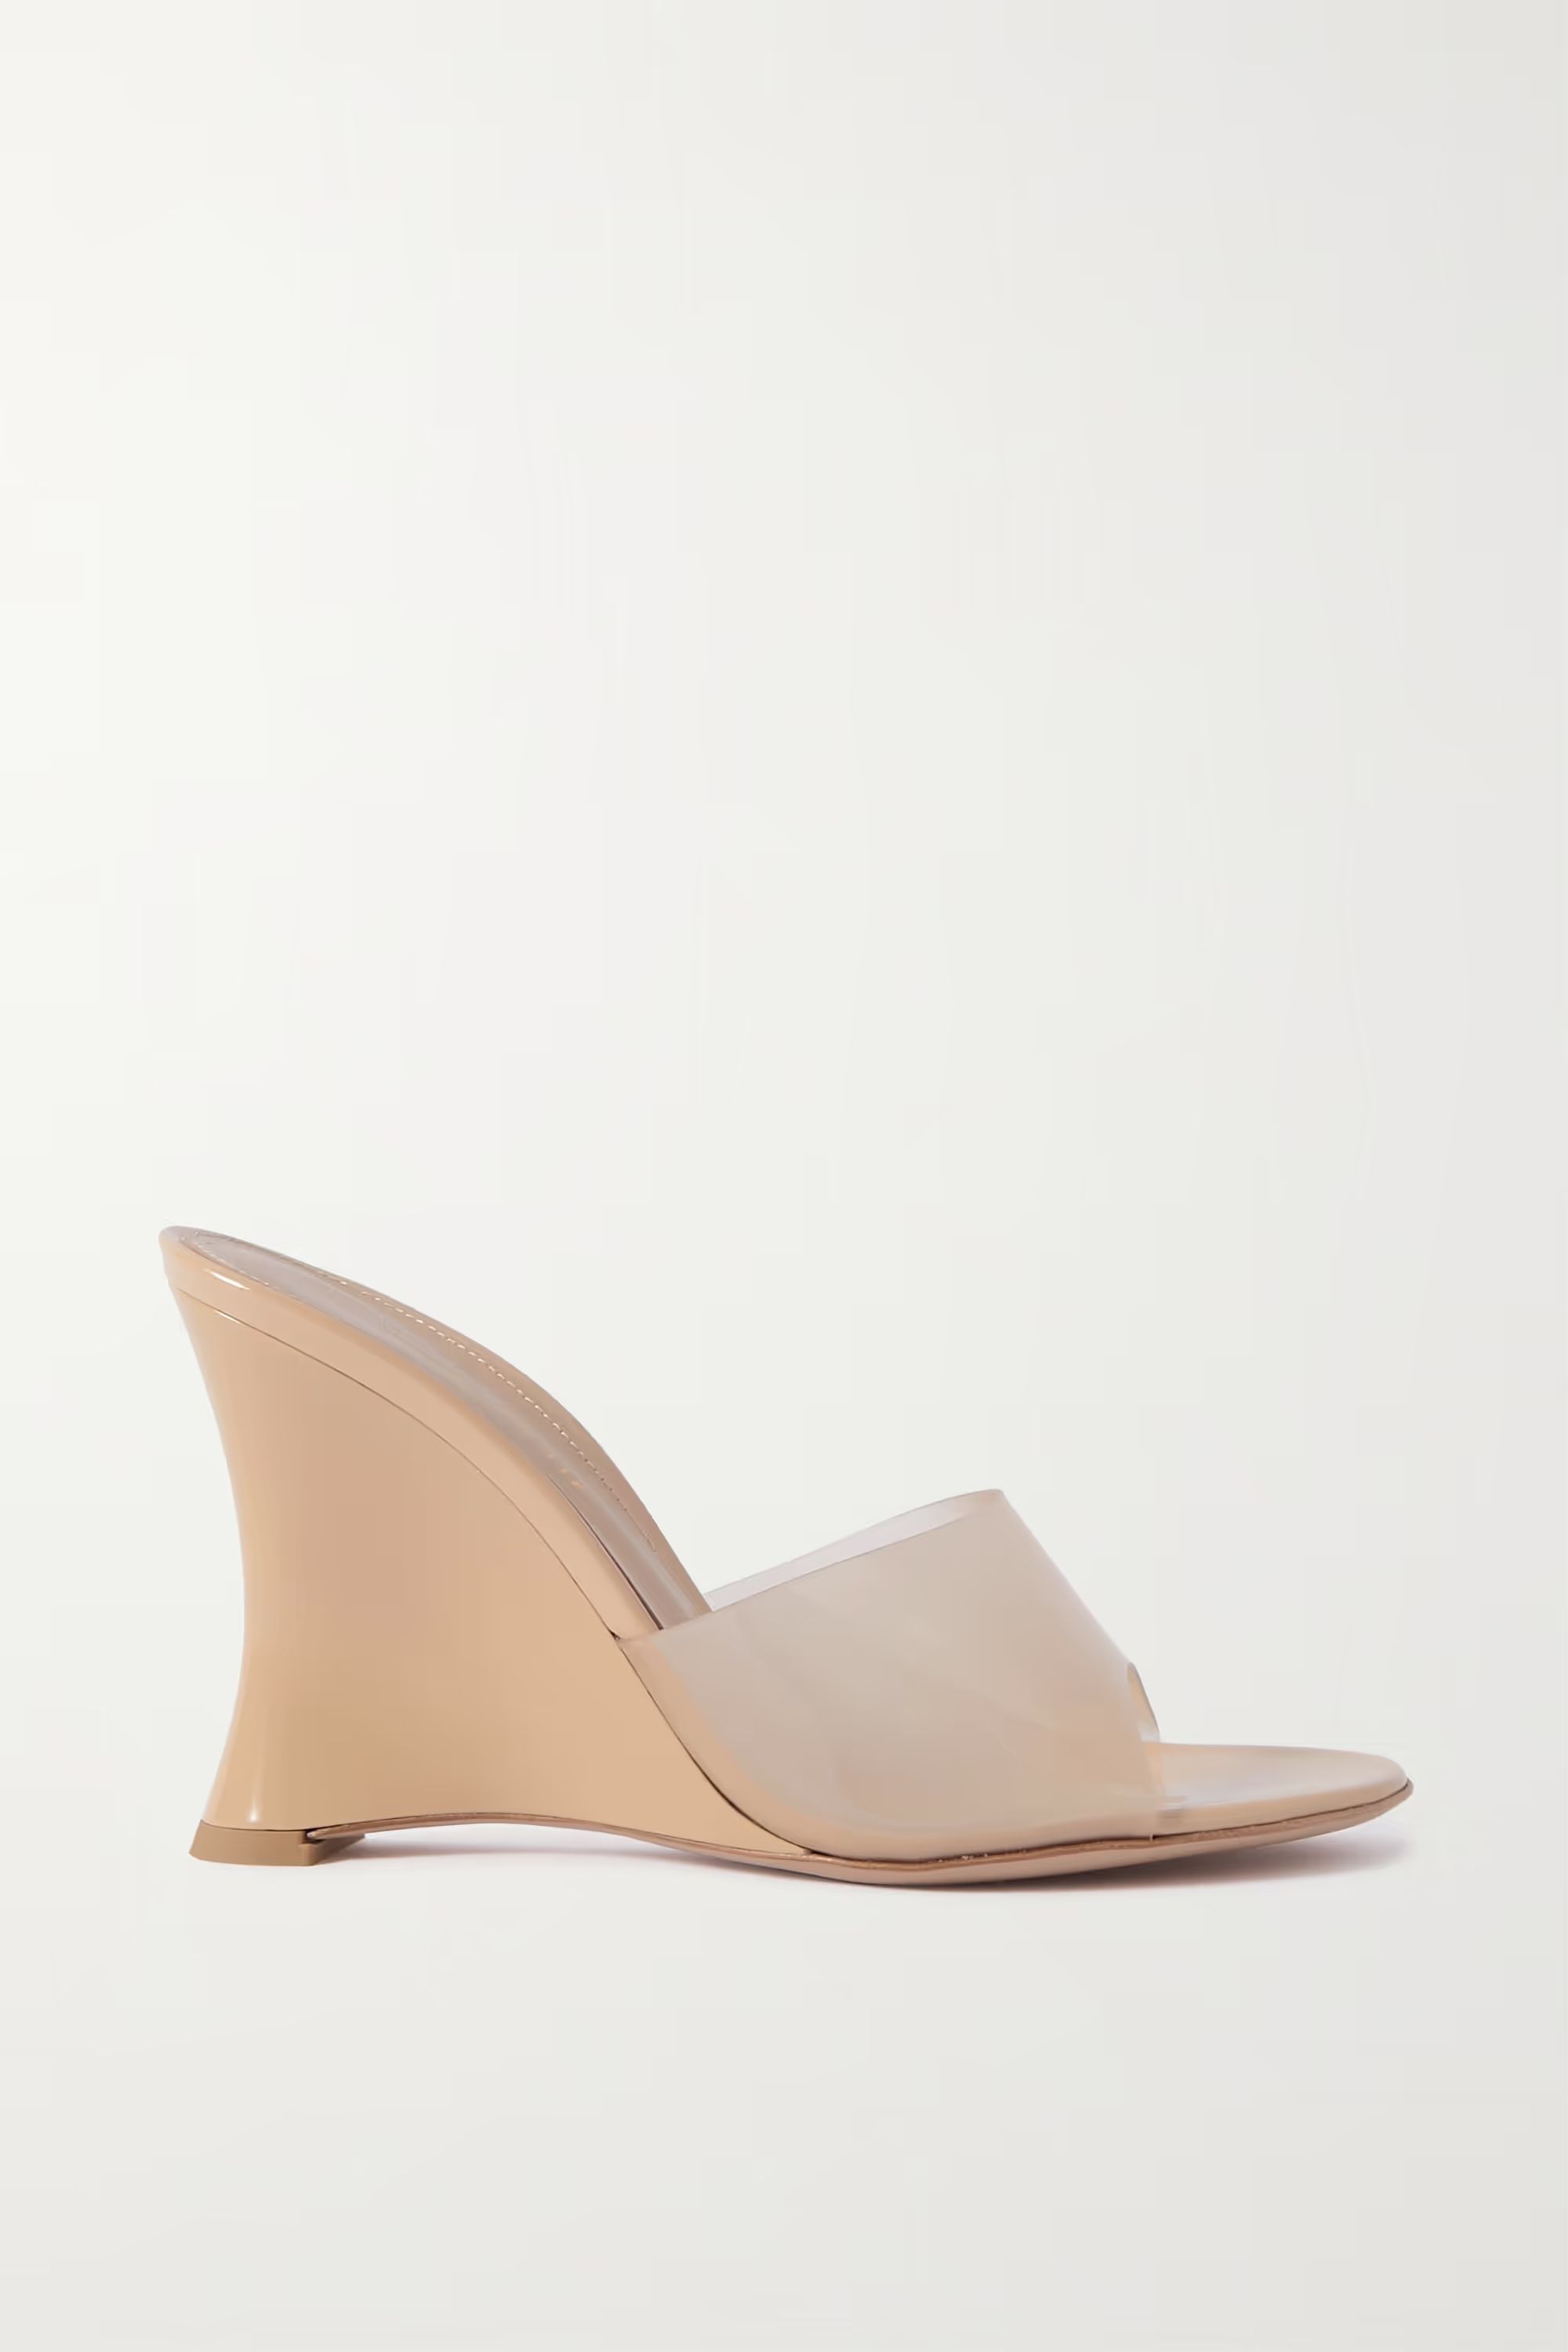 Futura 95 patent-leather and PVC wedge sandals | NET-A-PORTER (US)